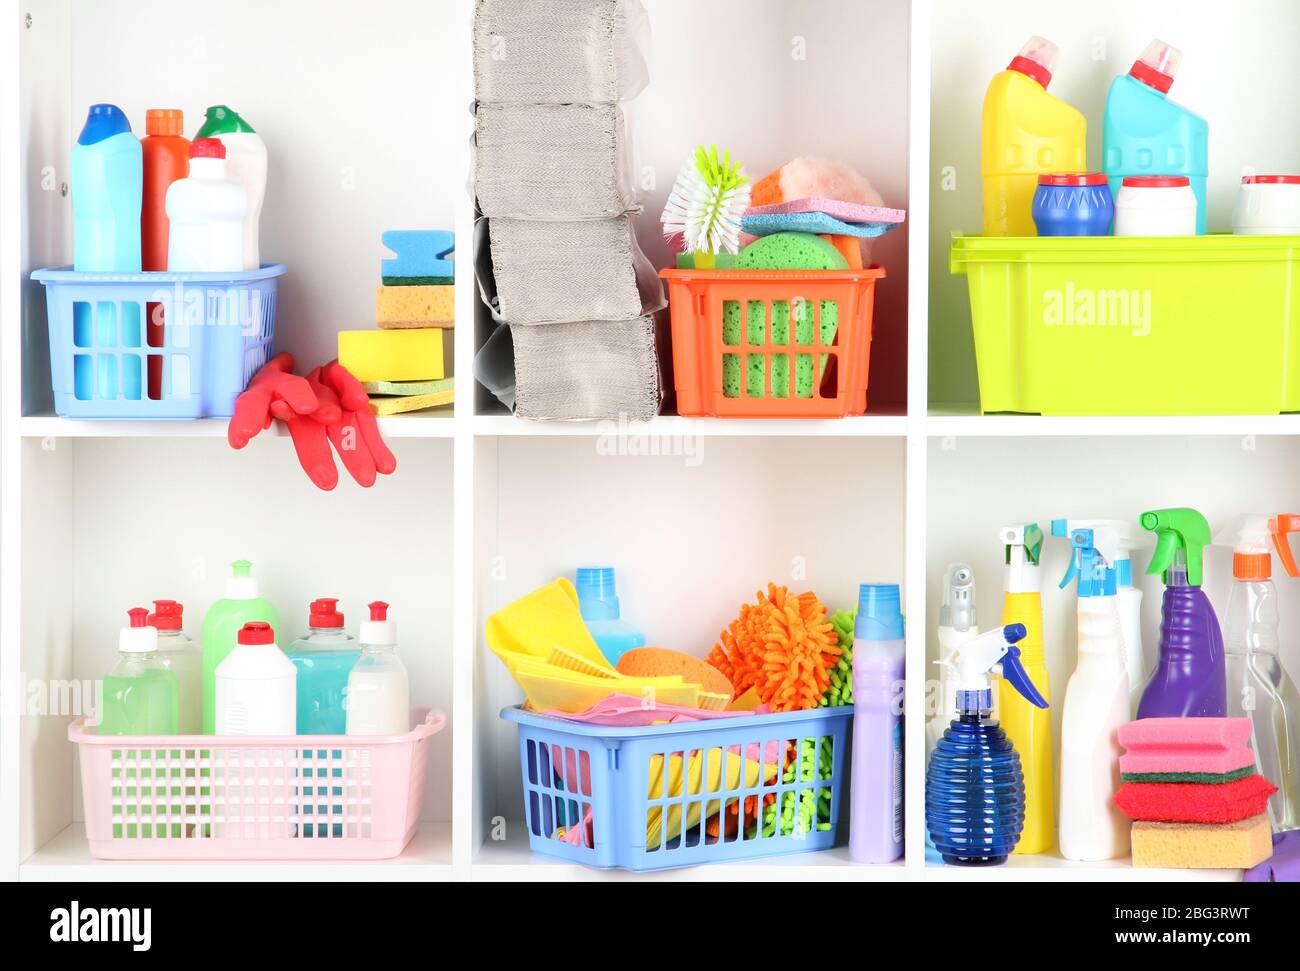 Shelves in pantry with cleaners for home close-up Stock Photo